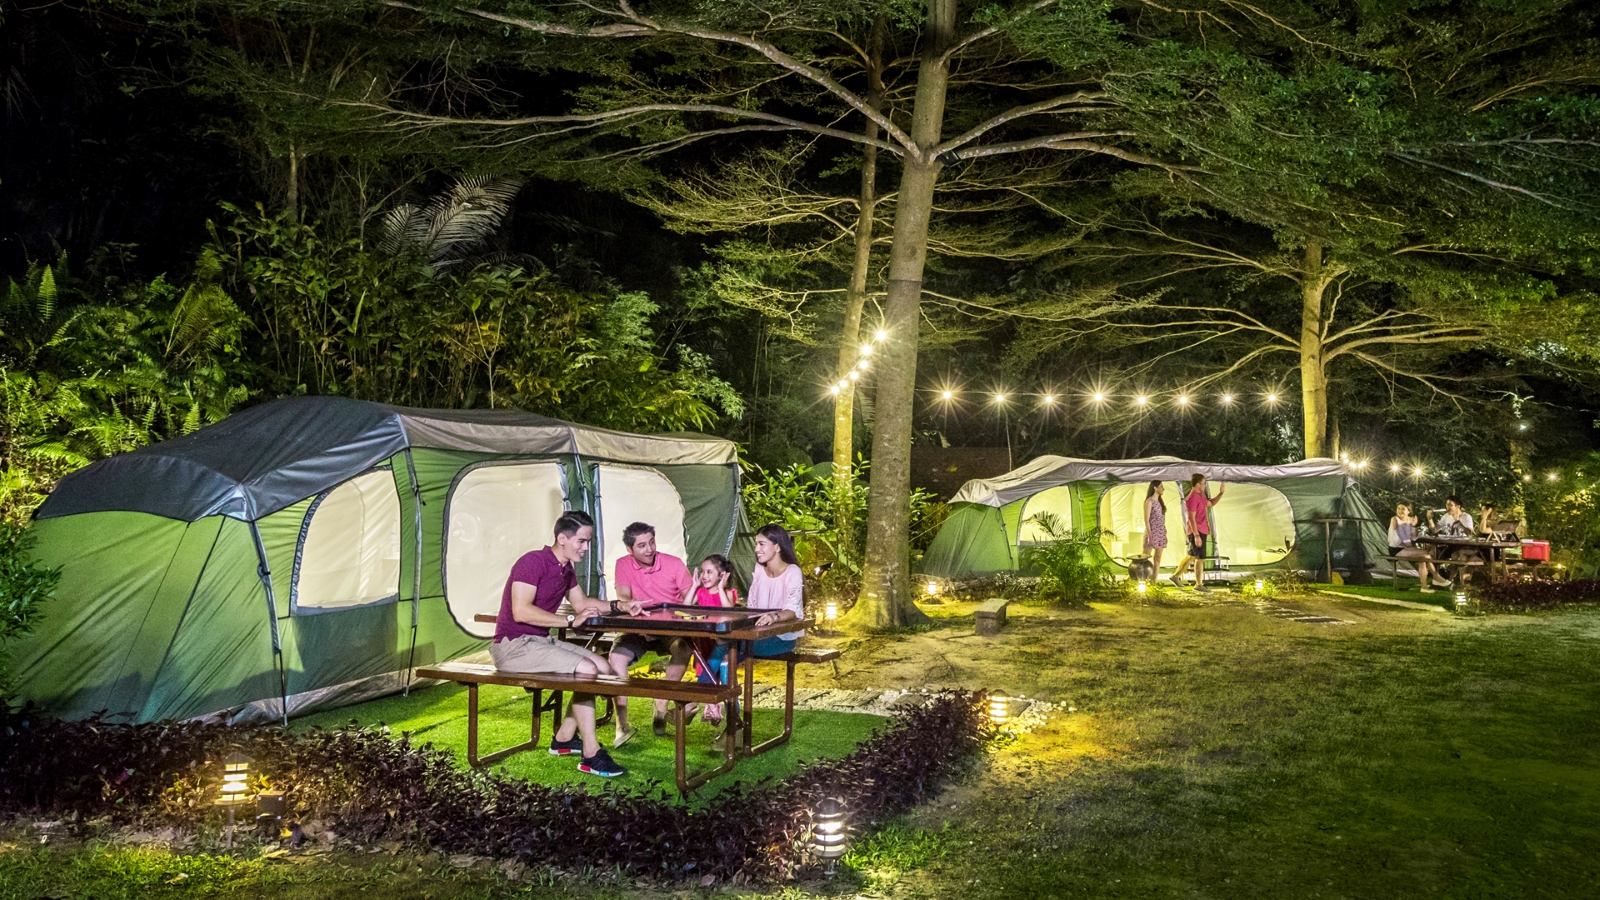 Comfortable and spacious, each glamping tent at Sunway Lost World Of Tambun is equipped with handy amenities.